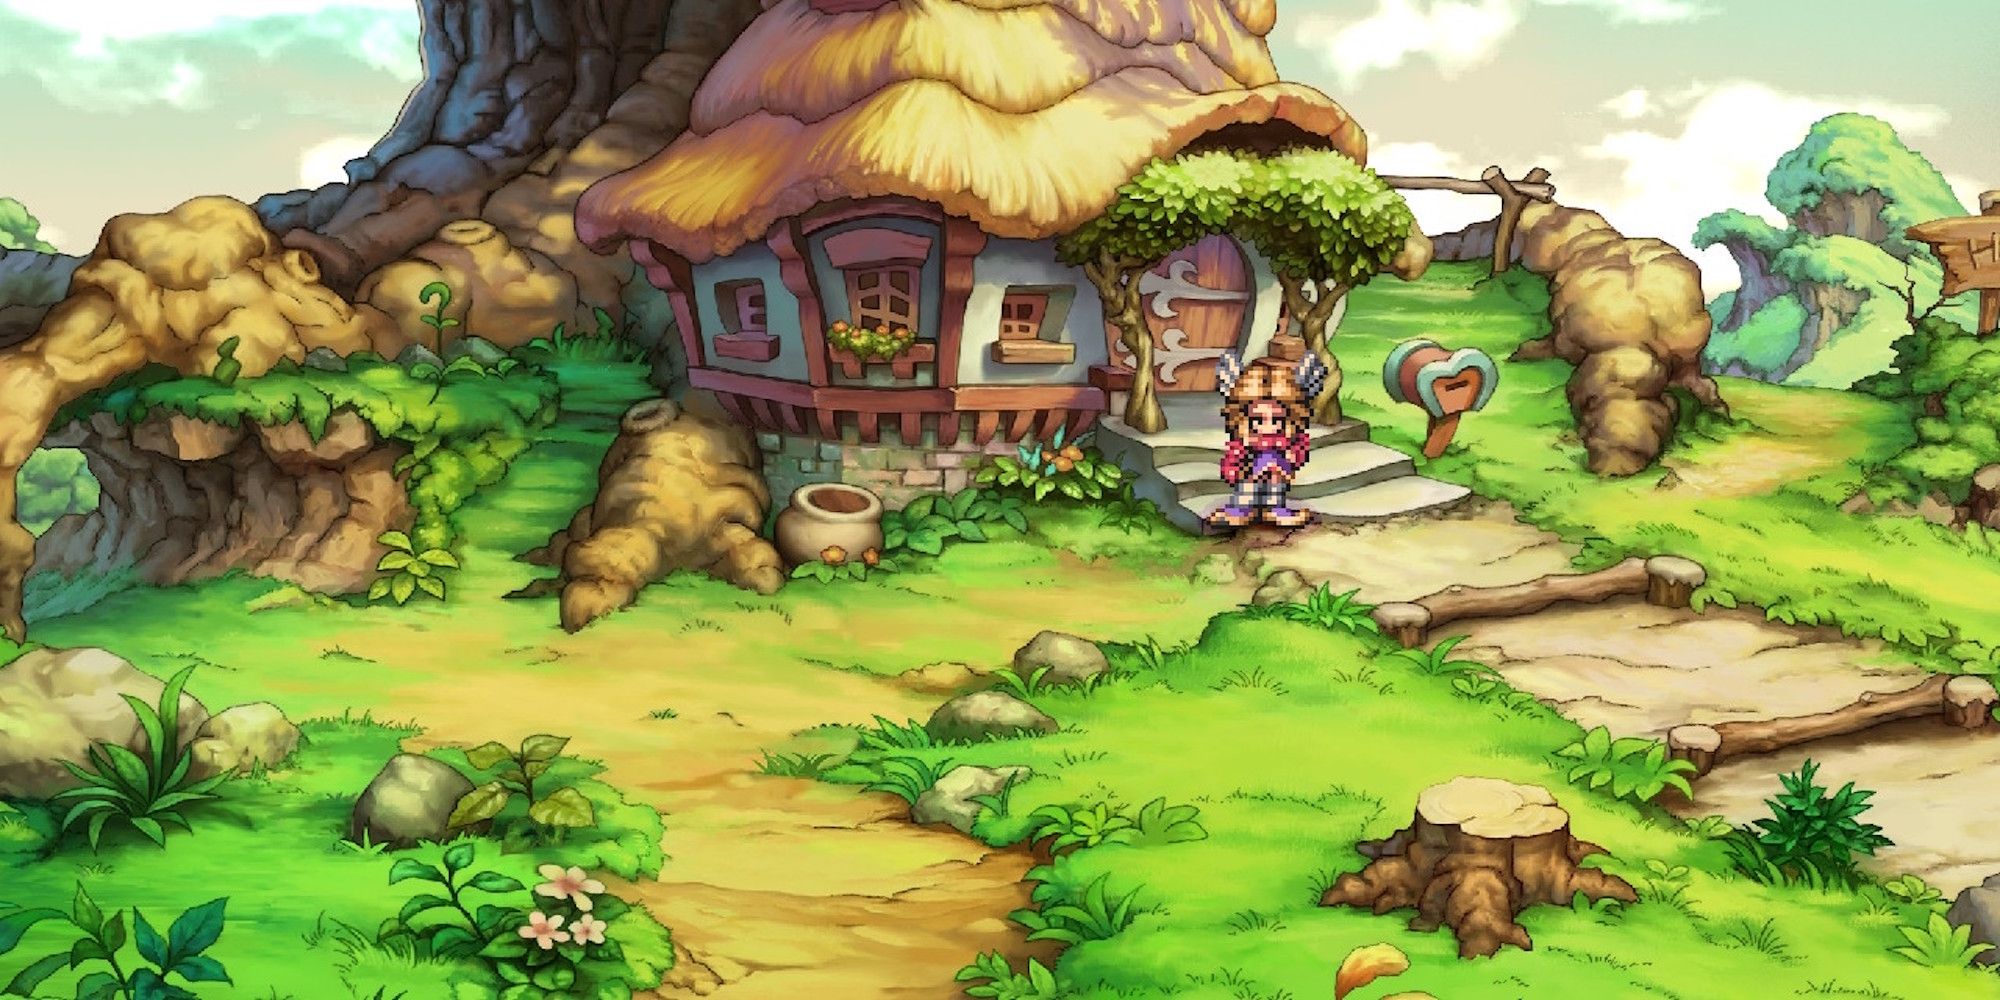 Exploring the world in Legend of Mana